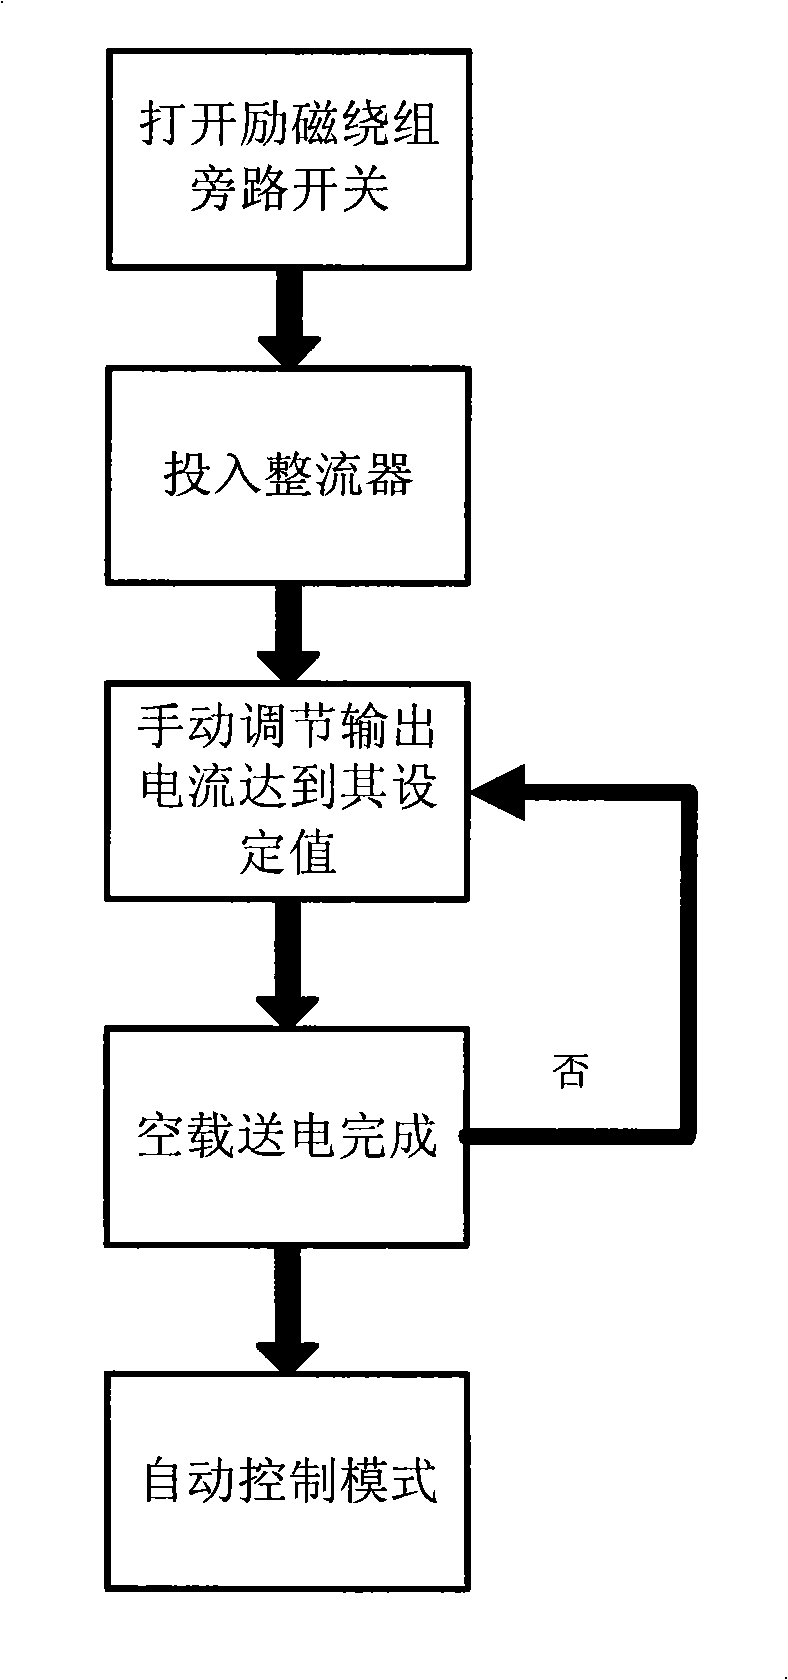 Control method for parellel reactor with ultra-high/extra-high voltage magnetic control type